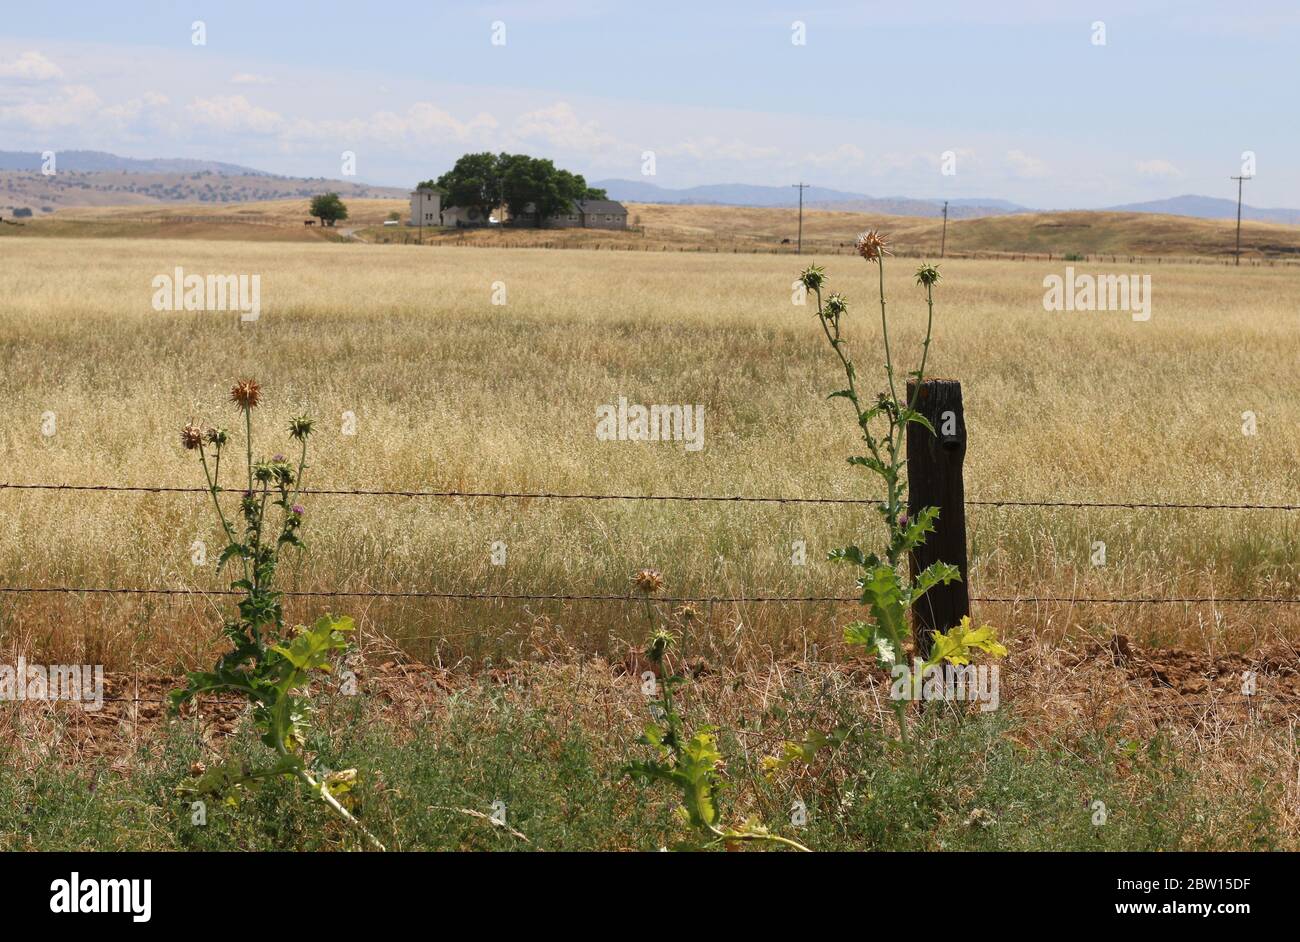 Vast fields of grazing pasture, with the Sierra Nevada Mountains in the distance, framed by fencing Stock Photo